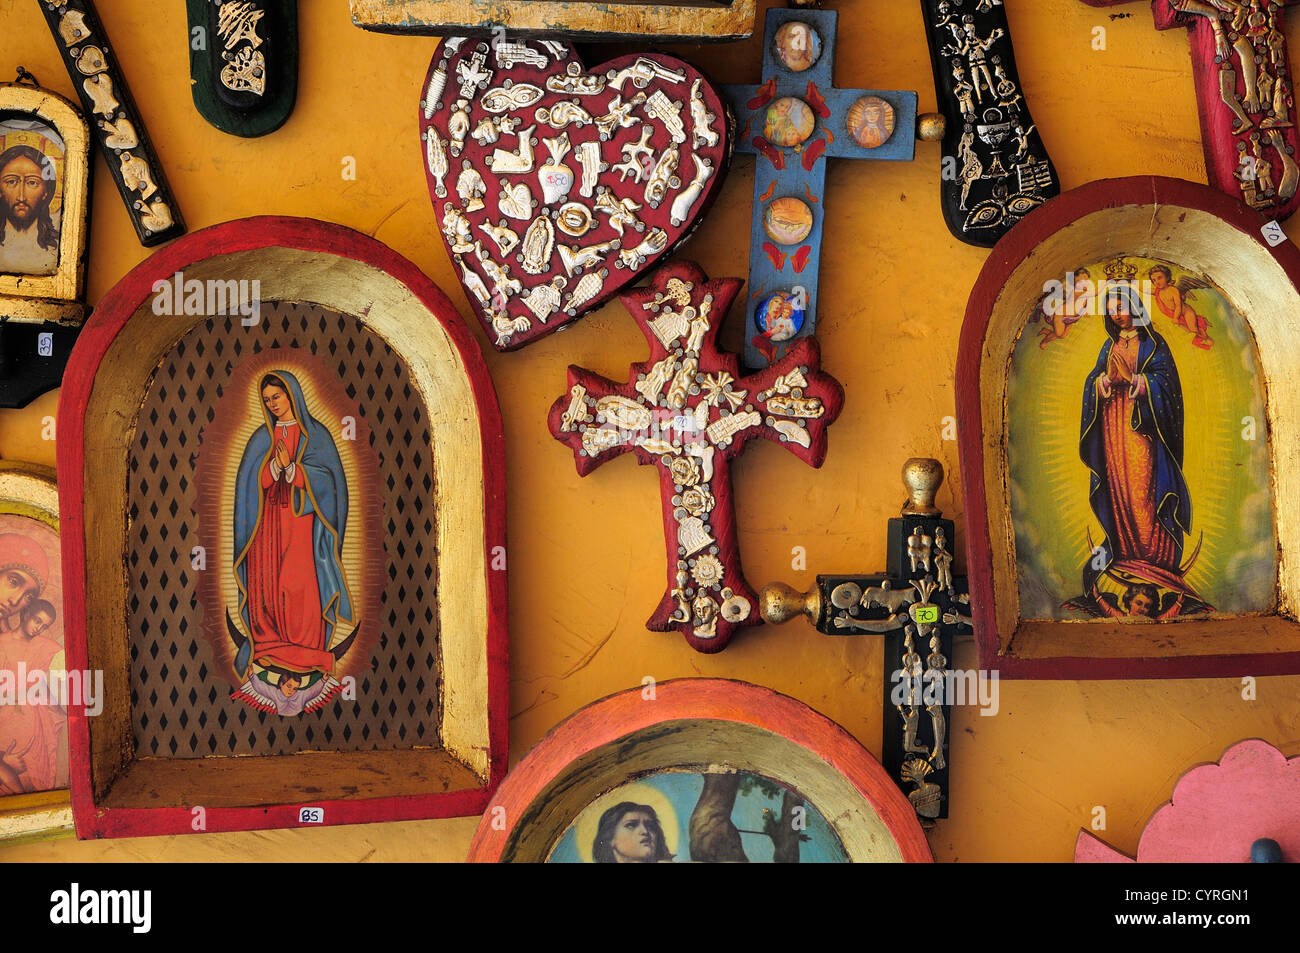 Religious kitsch art displayed on yellow painted wall  American  Hispanic Latin America Latino Mexican Religion Shops Shoppers Stock Photo